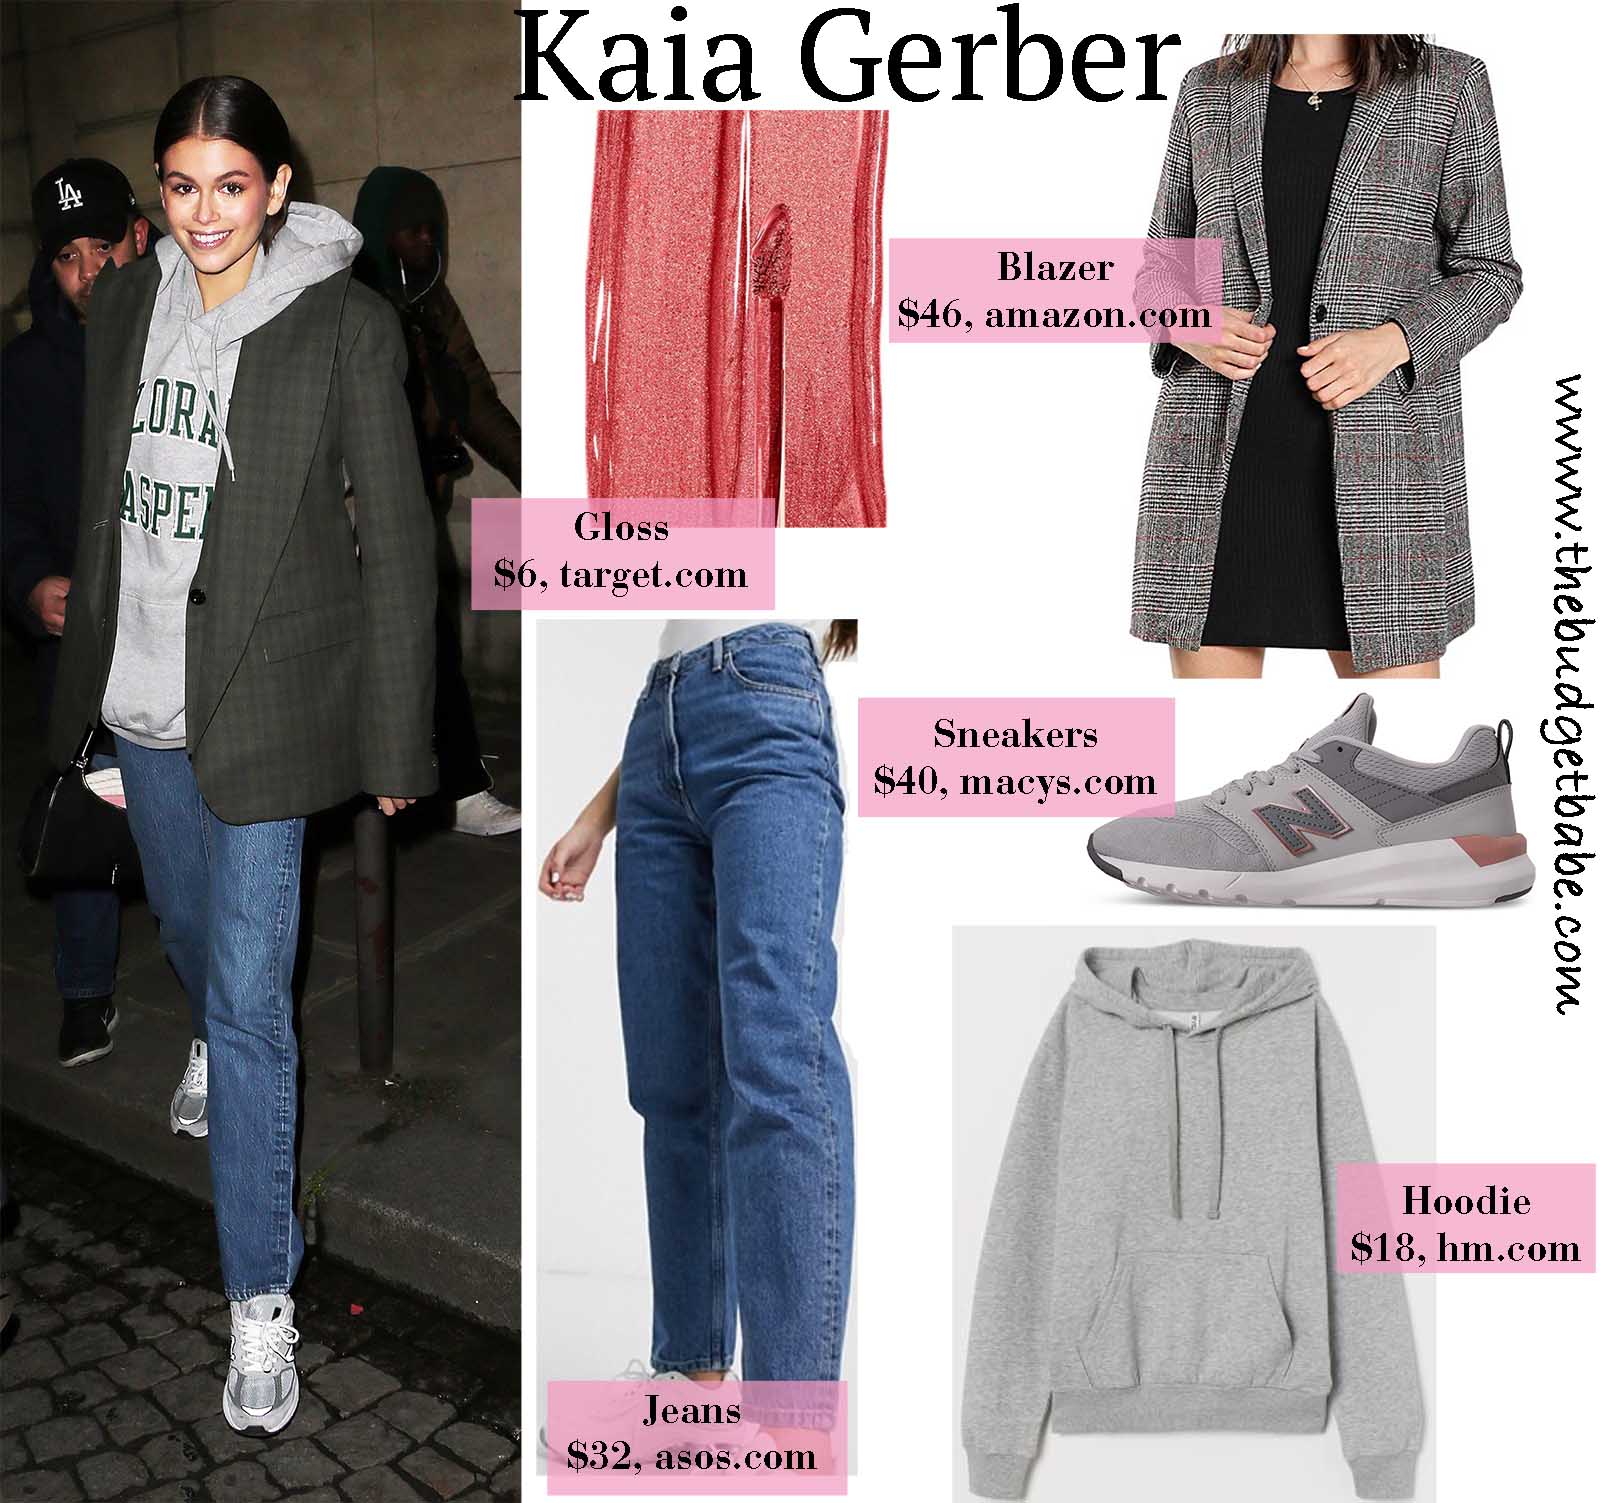 Kaia Gerber gives uss casual-chic  in menswear!